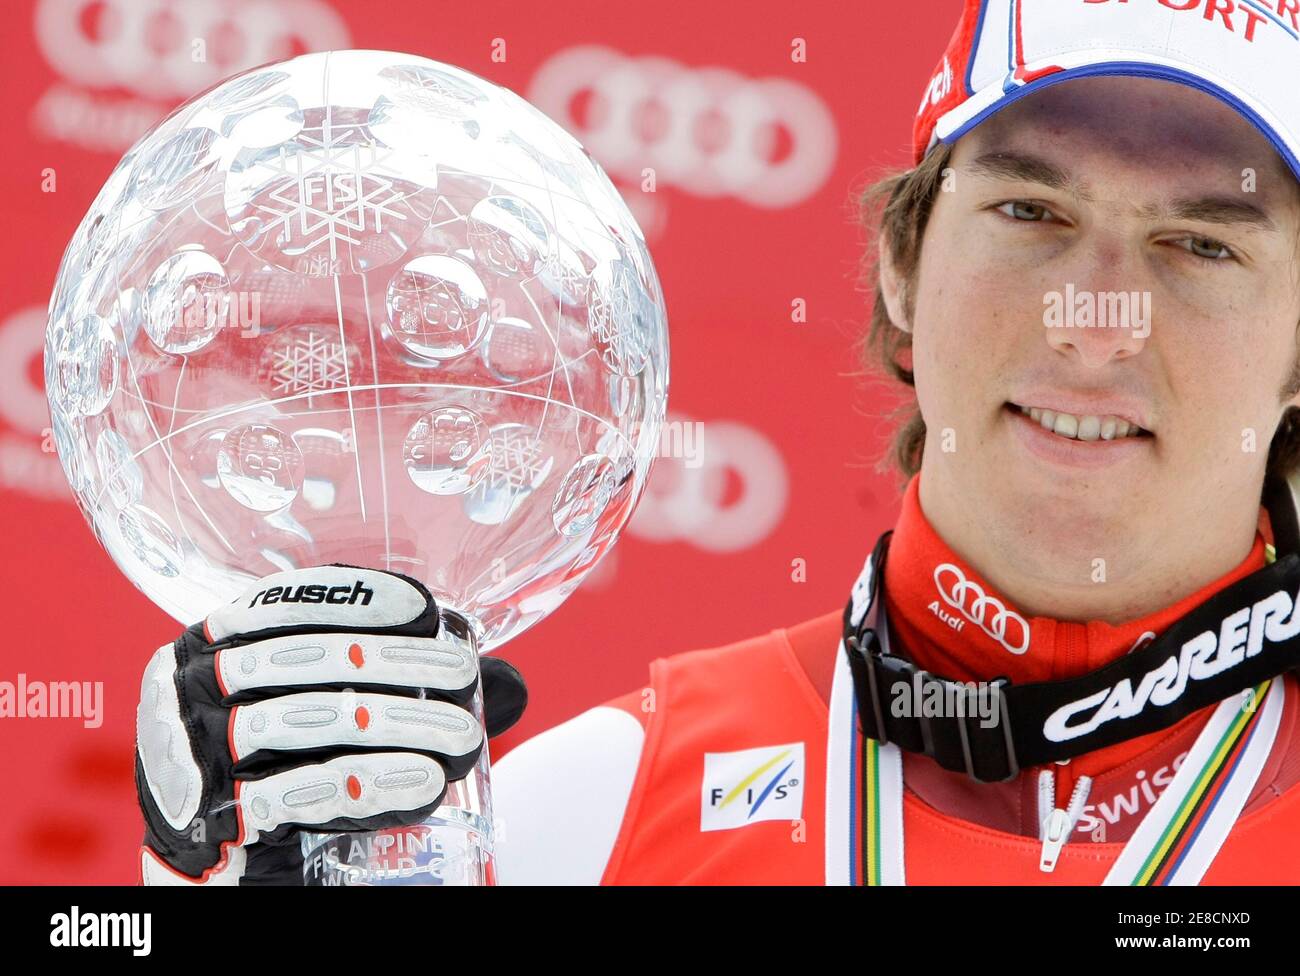 Carlo Janka of Switzerland poses with the men's overall Alpine Skiing World Cup trophy in Garmisch-Partenkirchen March 13, 2010. REUTERS/Michaela Rehle (GERMANY - Tags: SPORT SKIING) Foto Stock